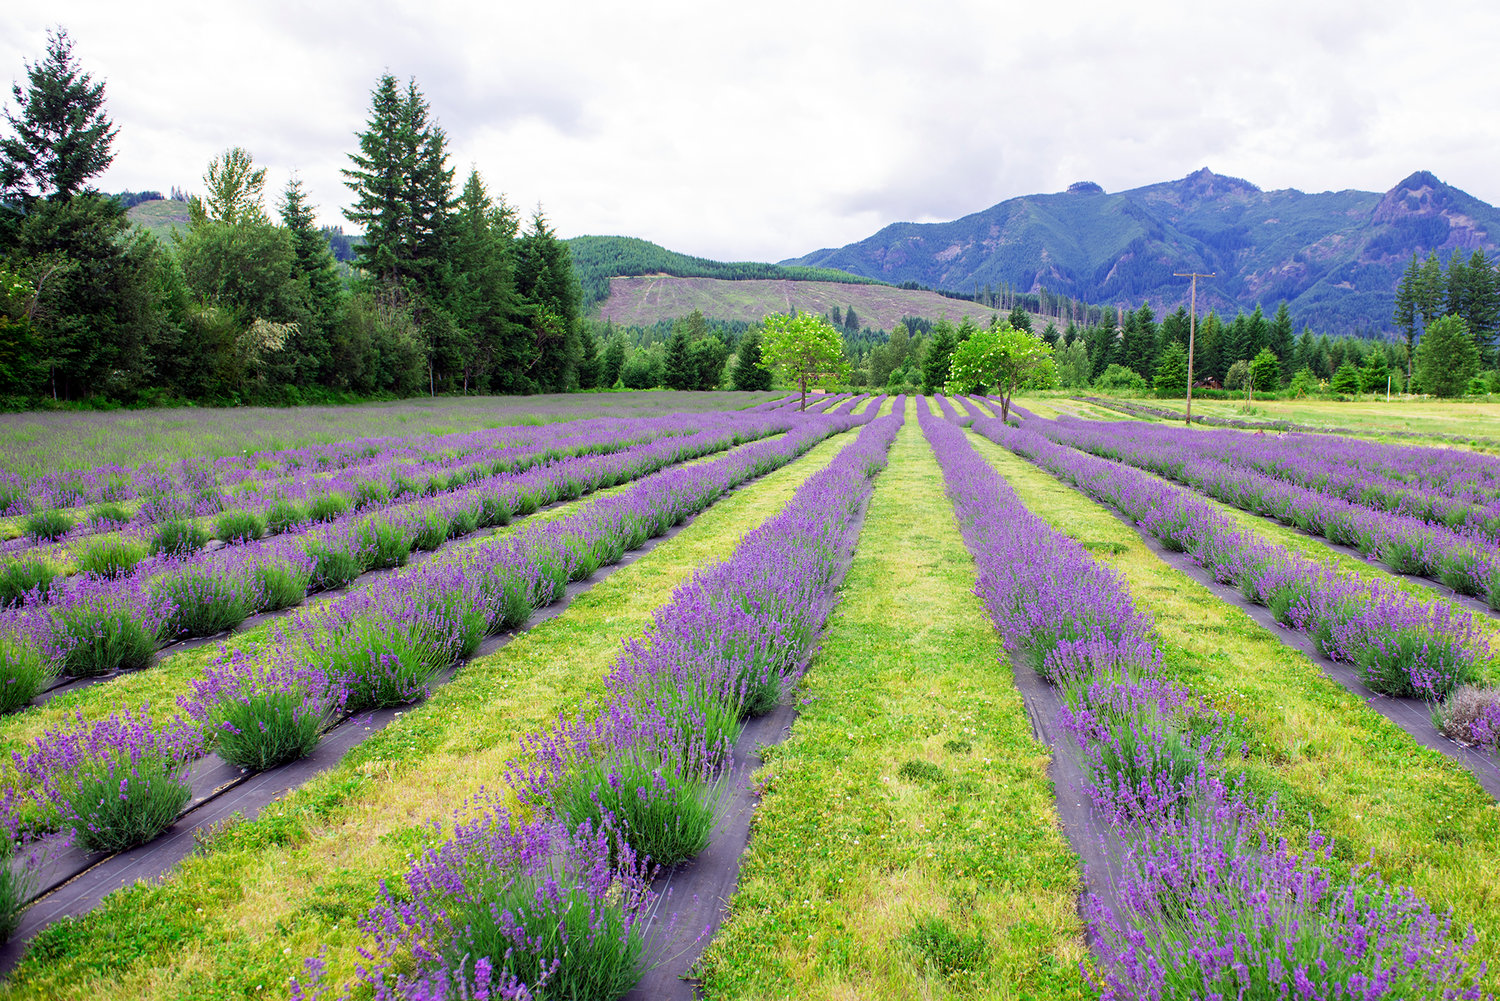 Thousands of lavender plants will be on display during a festival next weekend at the Cowlitz Falls Lavender Farm in Randle.